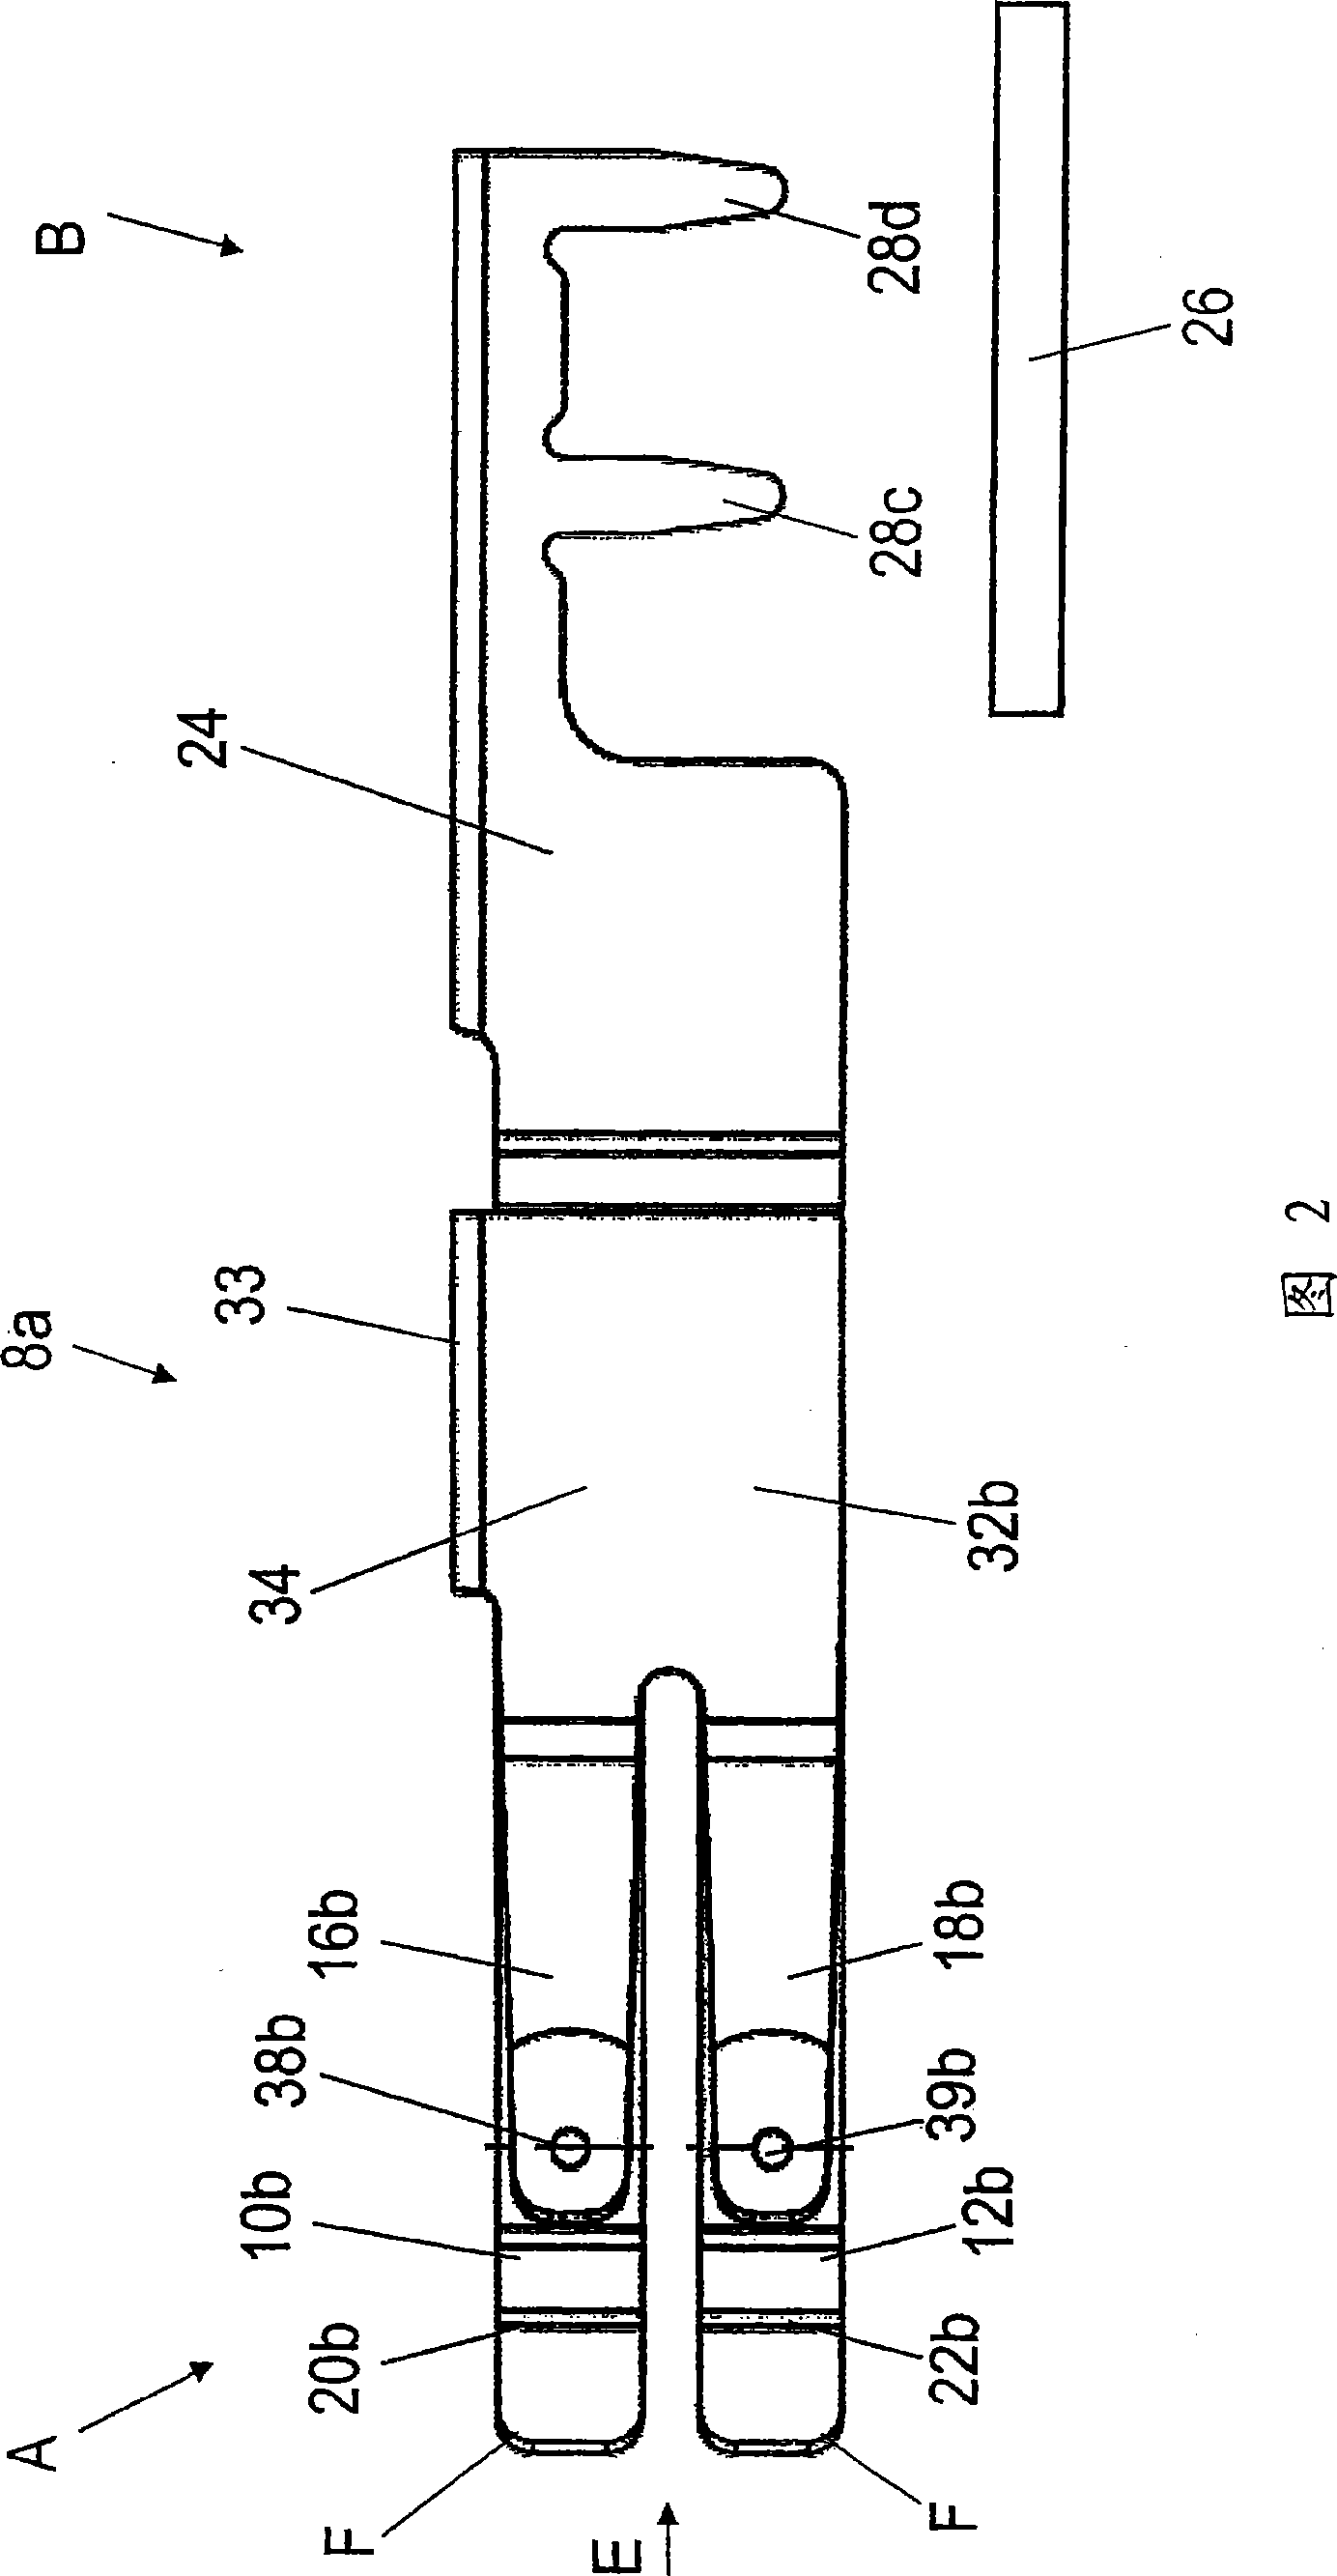 Spring contact for an electric connector and connection